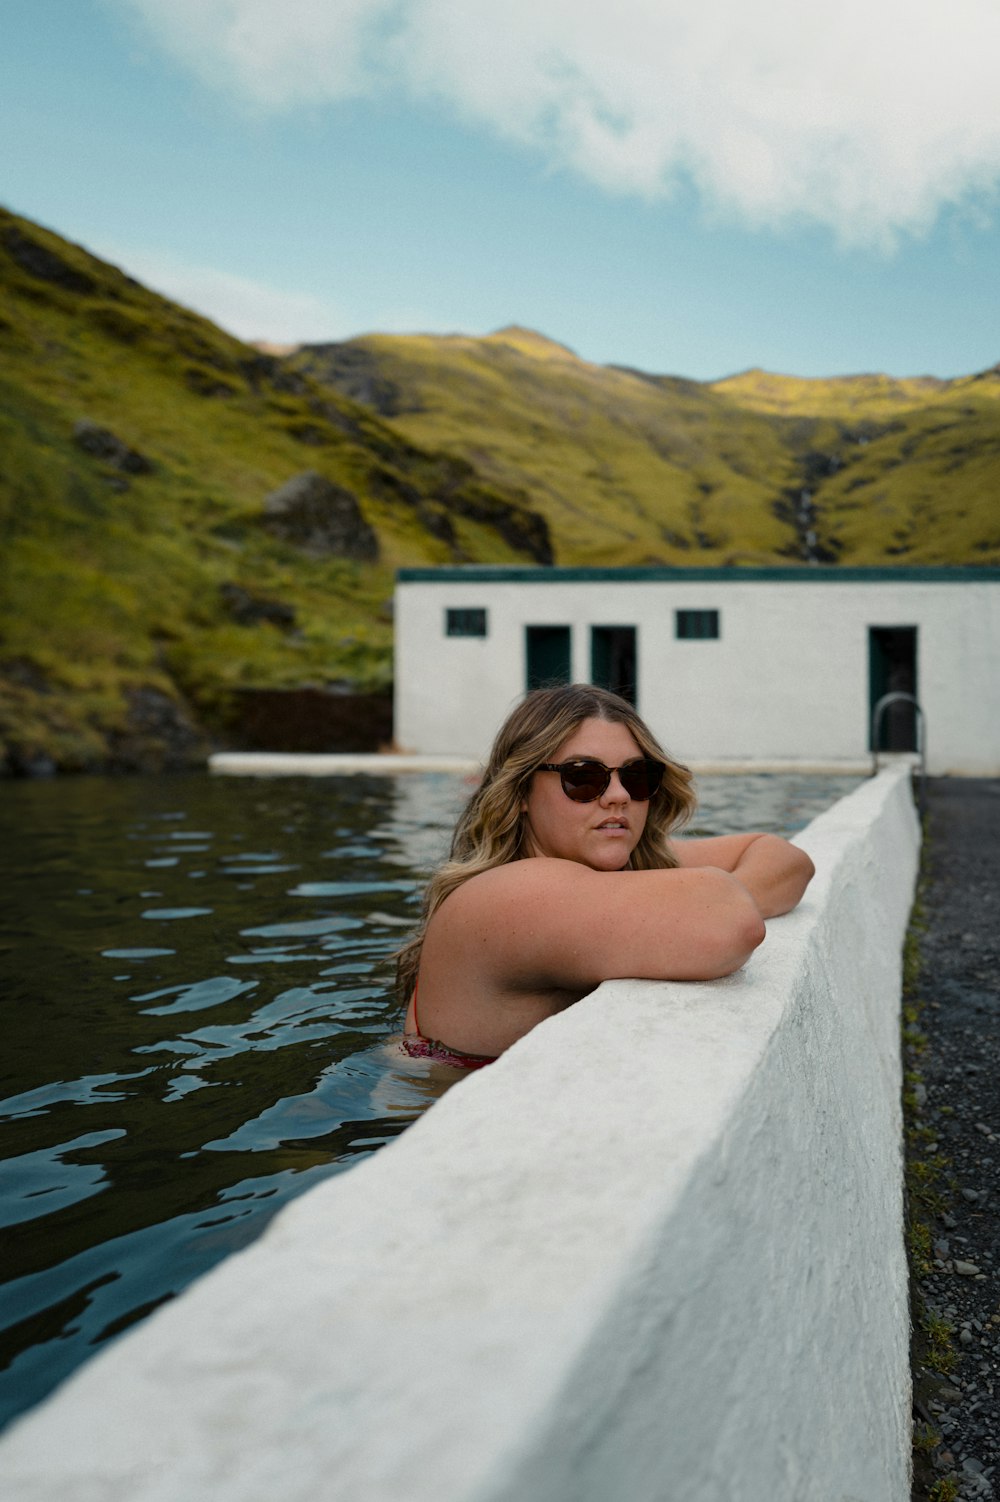 a woman in a bikini sitting on a wall next to a body of water